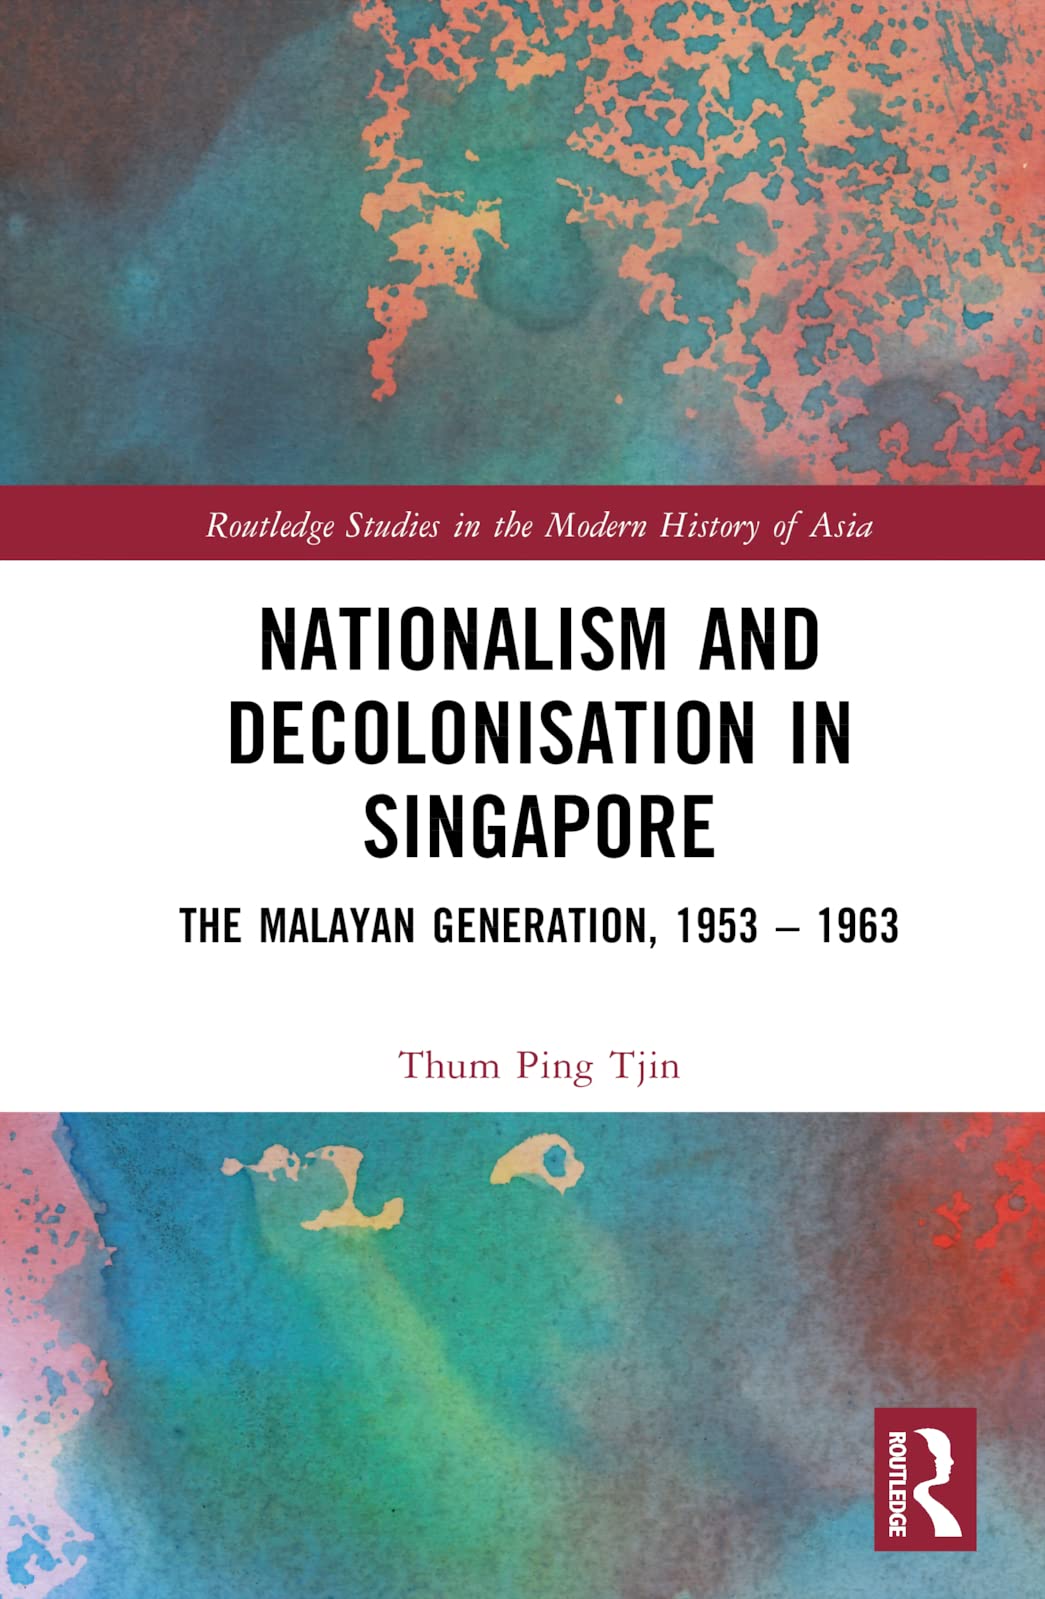 Nationalism and Decolonisation in Singapore: The Malayan Generation, 1953 – 1963